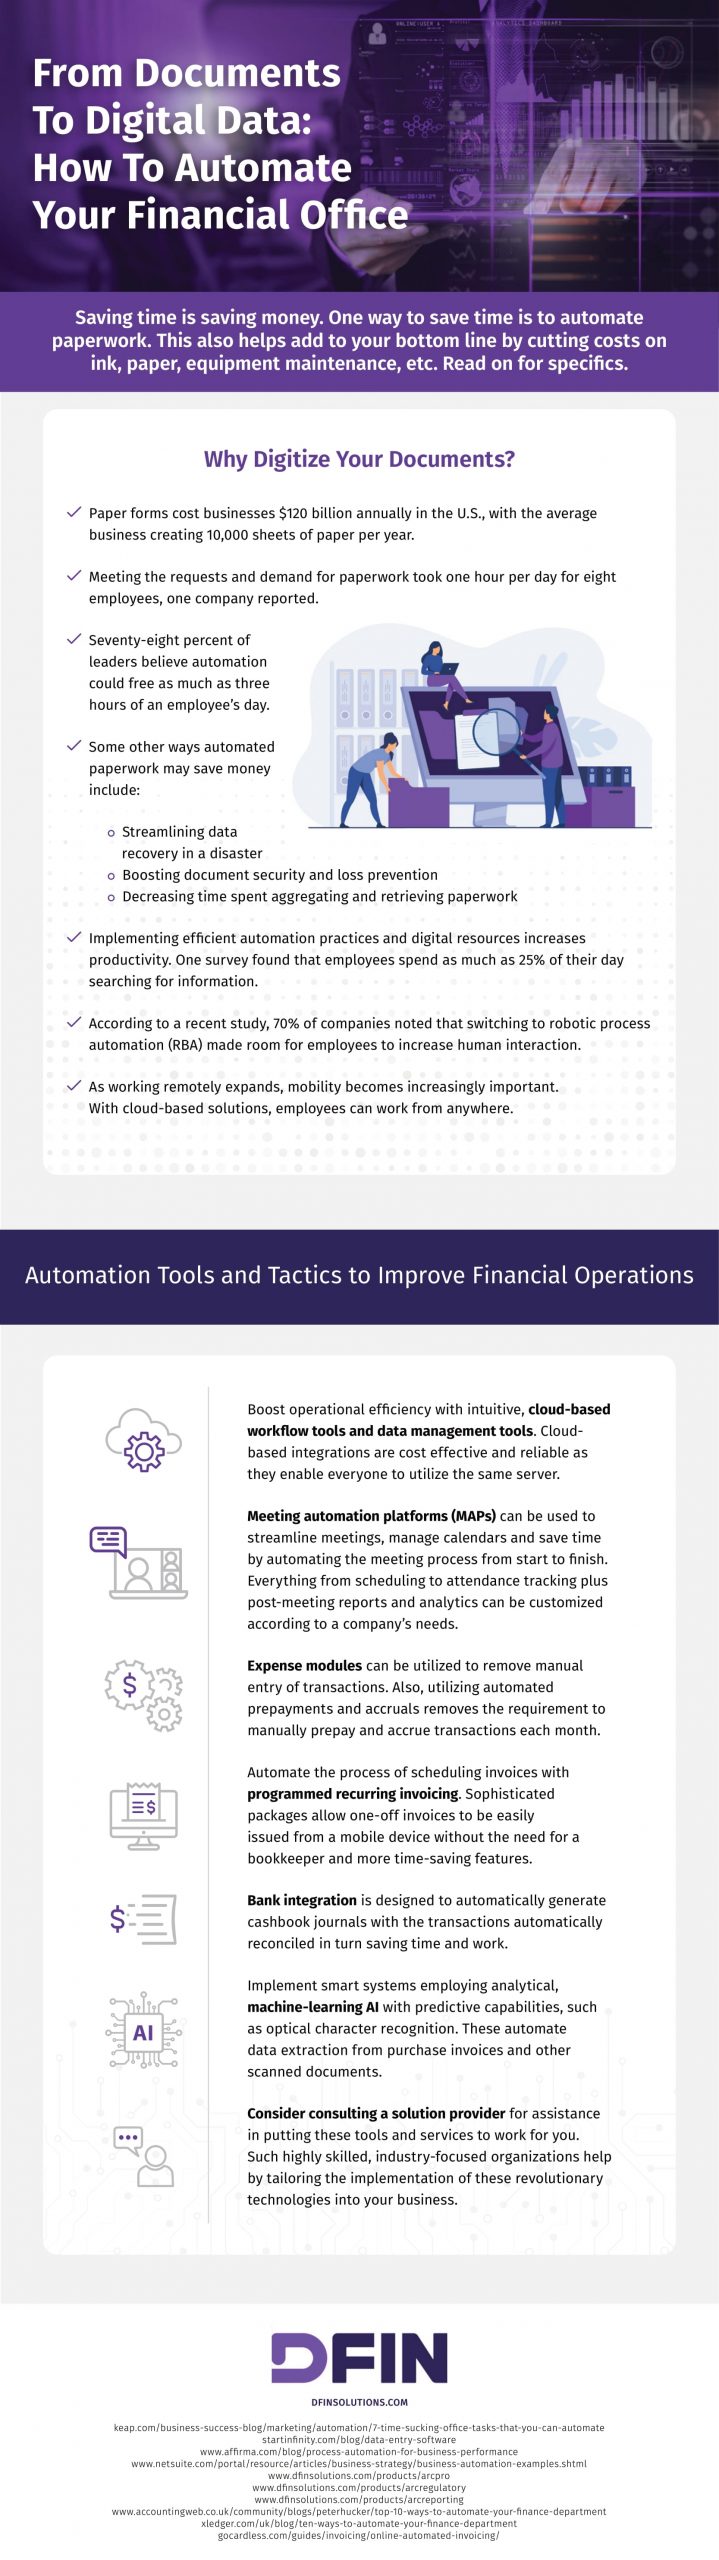 From Documents To Digital Data How To Automate Your Financial Office